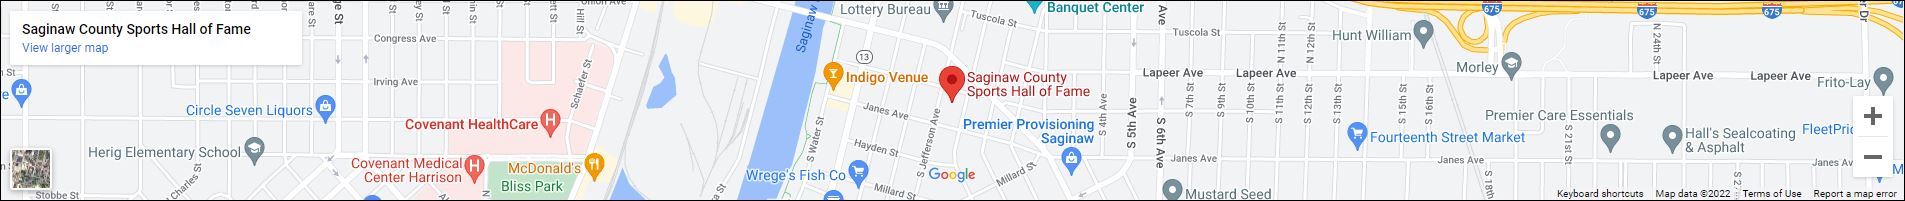 SAGINAW COUNTY SPORTS HALL OF FAME map 1